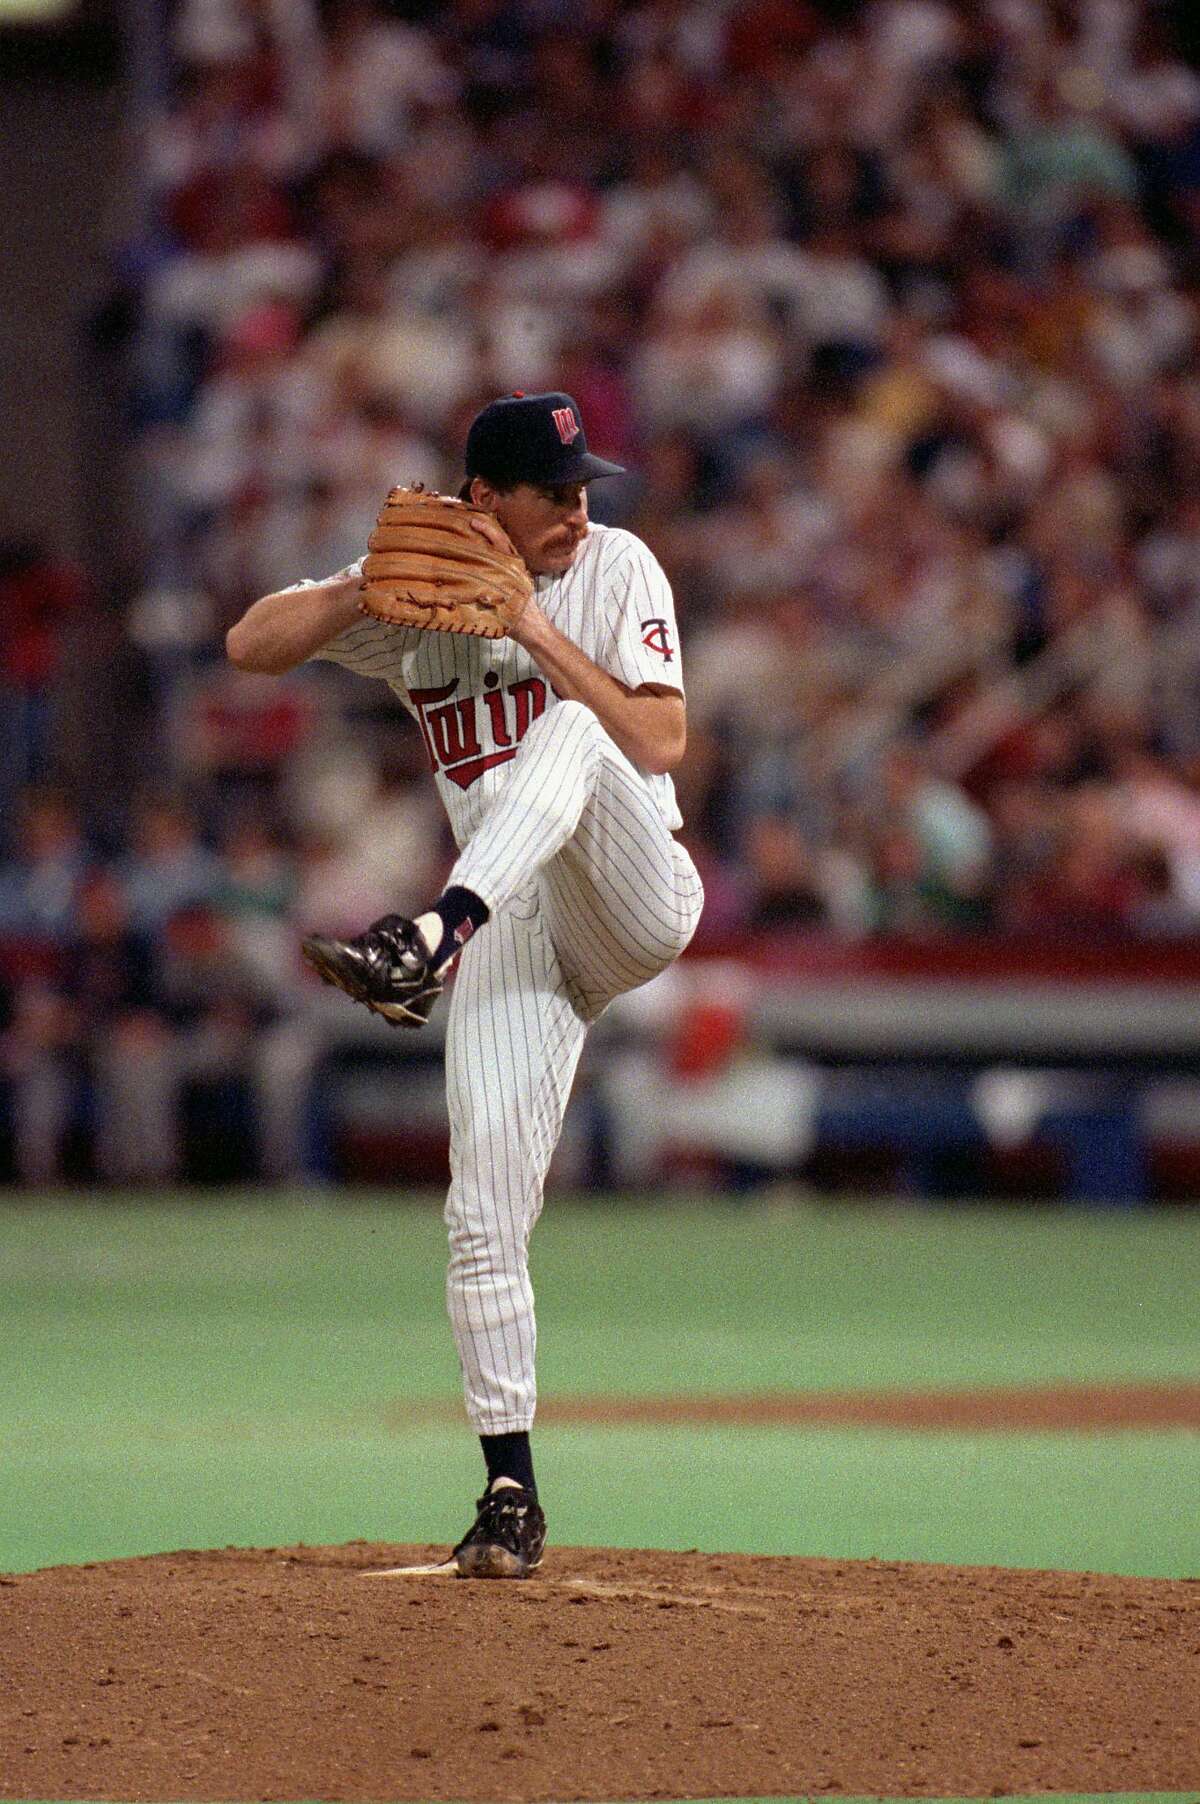 MINNEAPOLIS - OCTOBER 27: Pitcher Jack Morris #47 of the Minnesota Twins delivers a pitch against the Atlanta Braves at the Metrodome in Minneapolis, Minneapolis, on October 27, 1991. The Twins defeated the Braves 1-0 in game 6, the final game of the 1991 World Series. Jack Morris was named MVP of the series. (Photo by Rick Stewart/Getty Images)